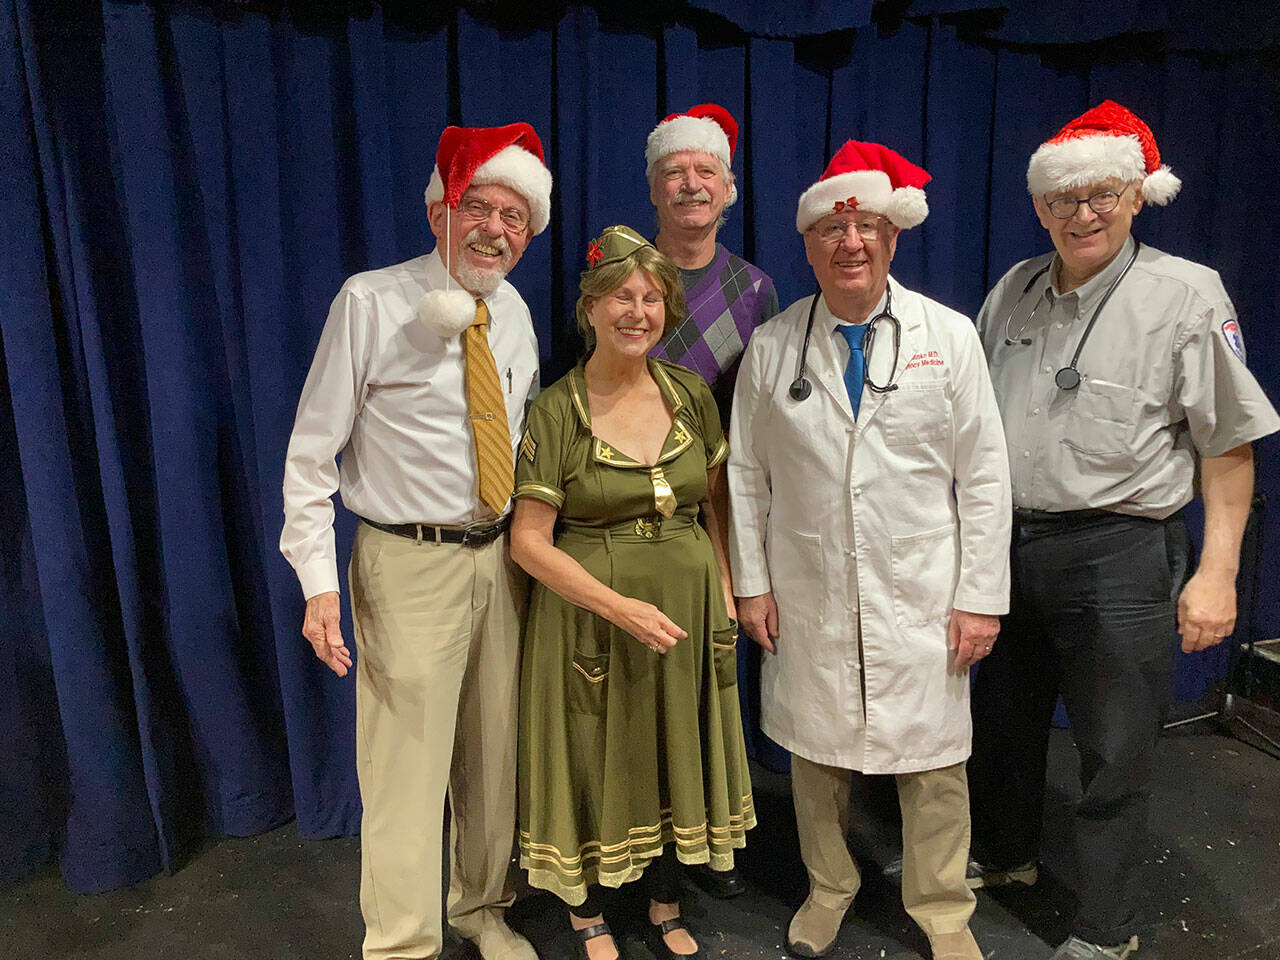 The holiday-themed production held earlier this month was the first live performance with a full audience at the Jewel Box Theatre since before the pandemic began in March of 2020. Castmembers from left to right: Al Gunby, Kathy Currie, Mike Currie (back), Gary Vance, and John Ackenhusen. Courtesy photo